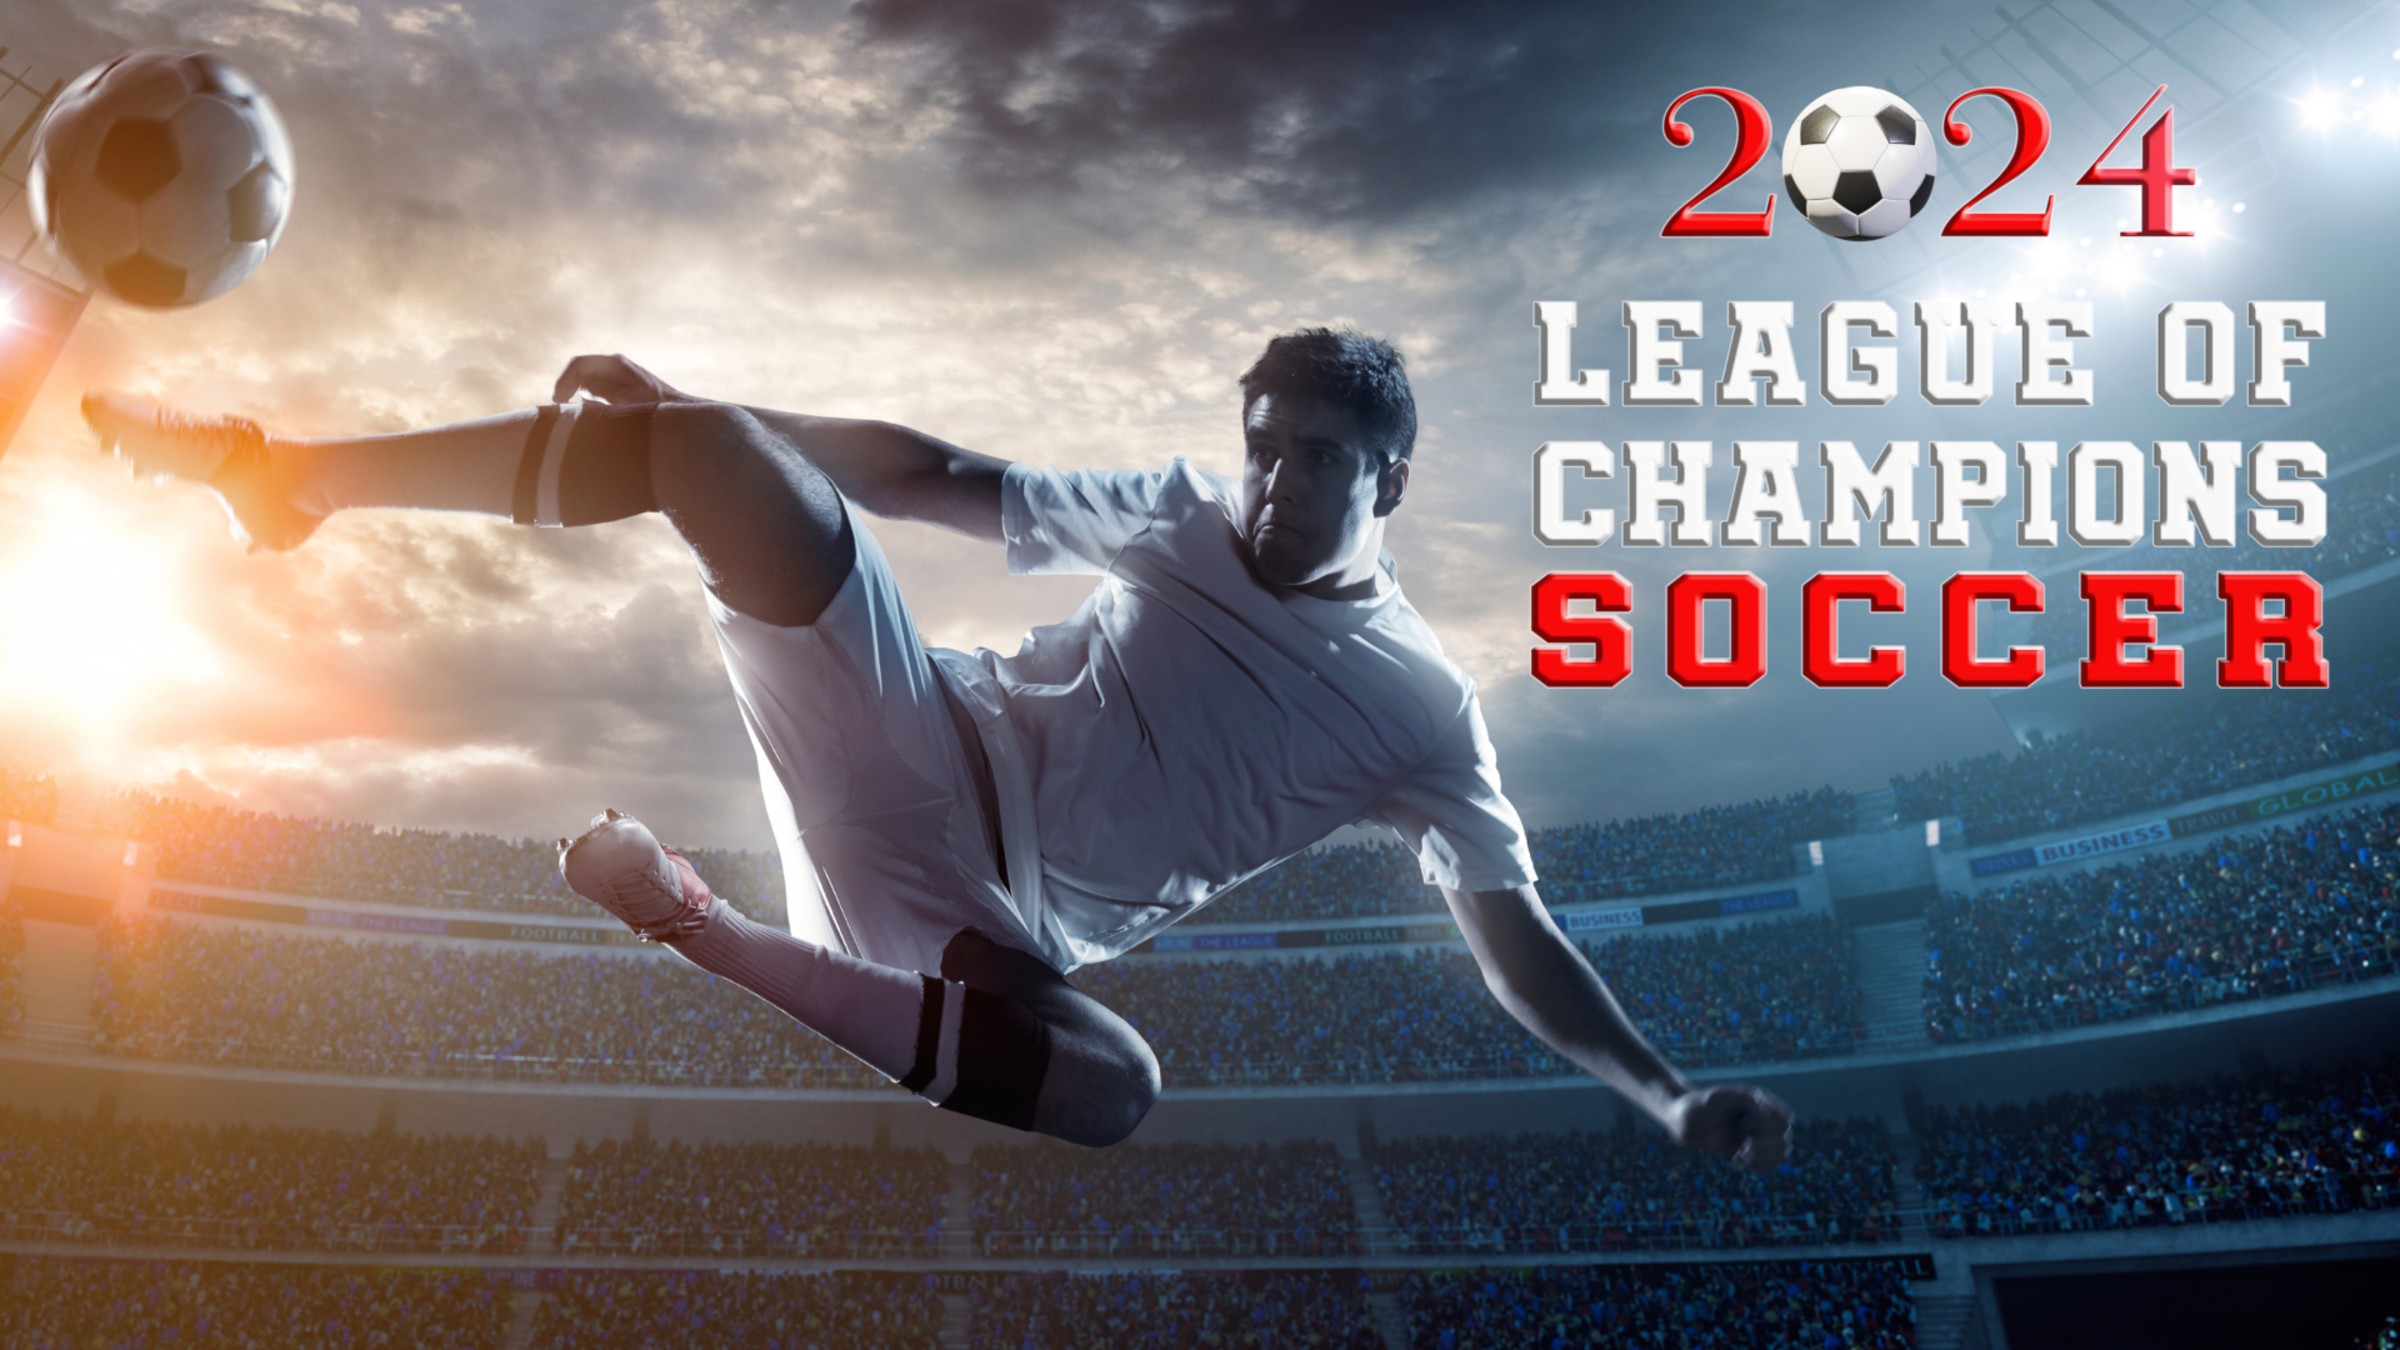 League of Champions Soccer 2024 for Nintendo Switch